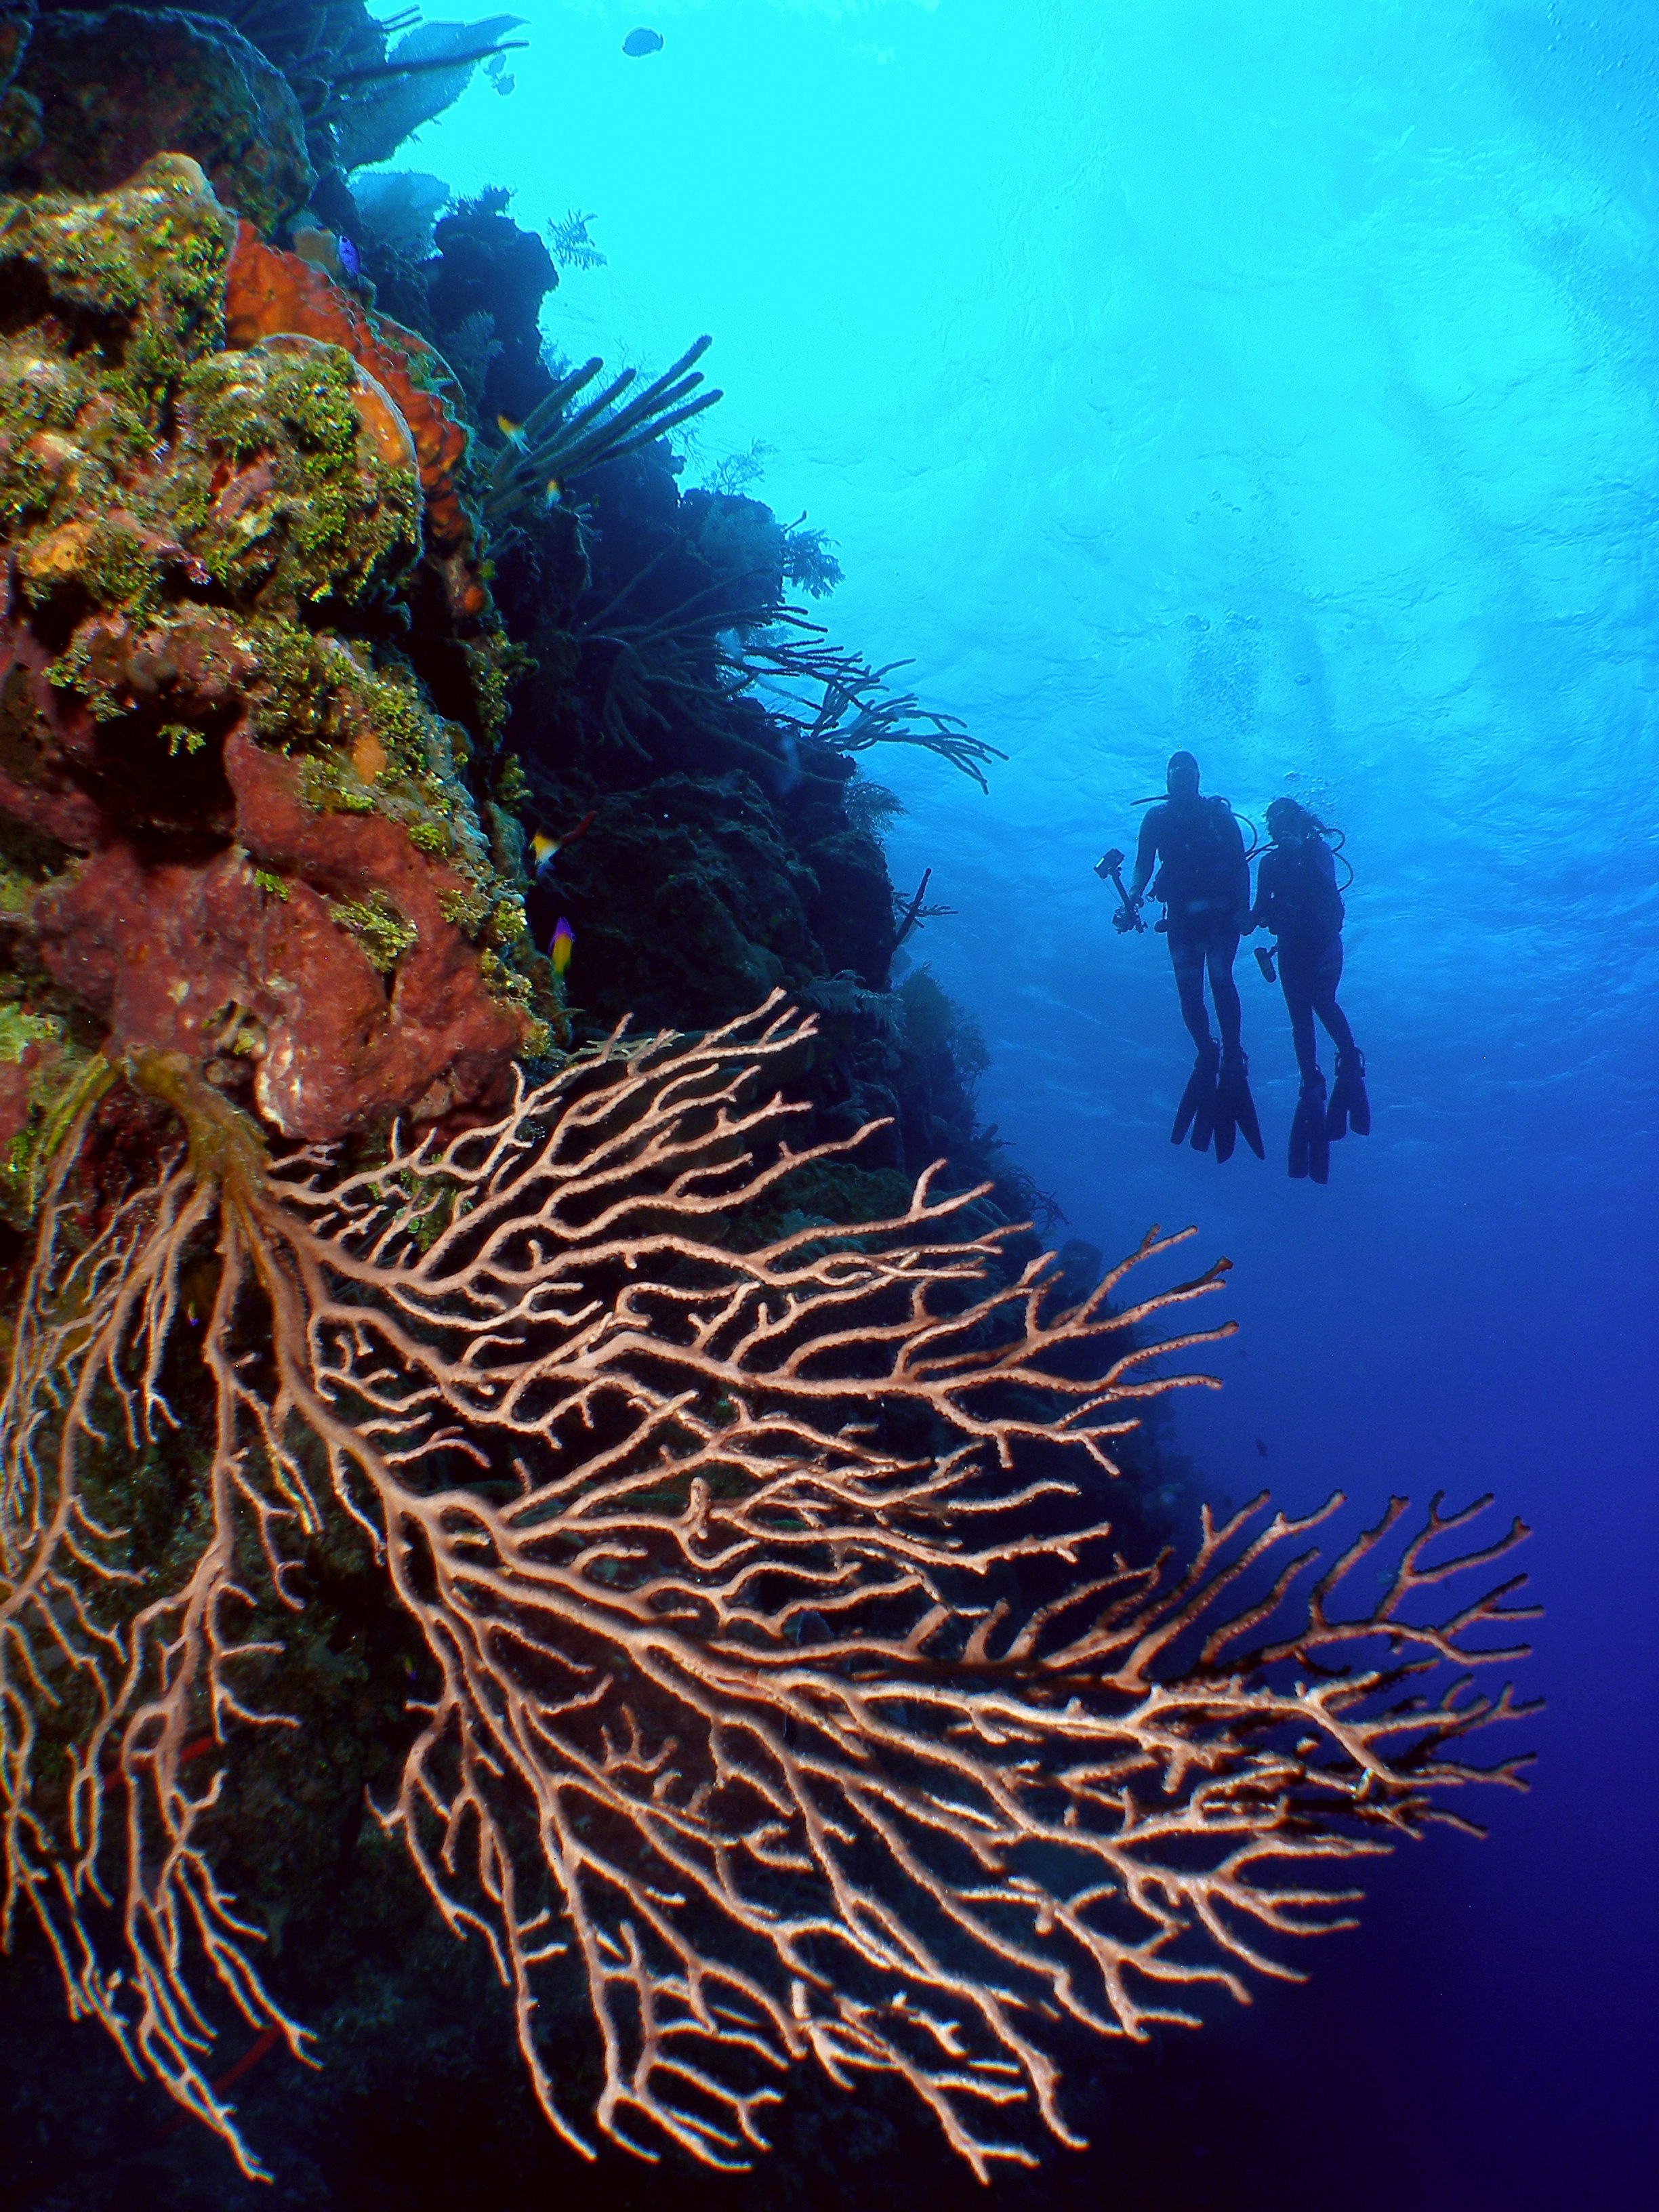 Two divers float vertically, almost silhouetted against the bright blue sea, next to a near vertical wall of colourful corals.